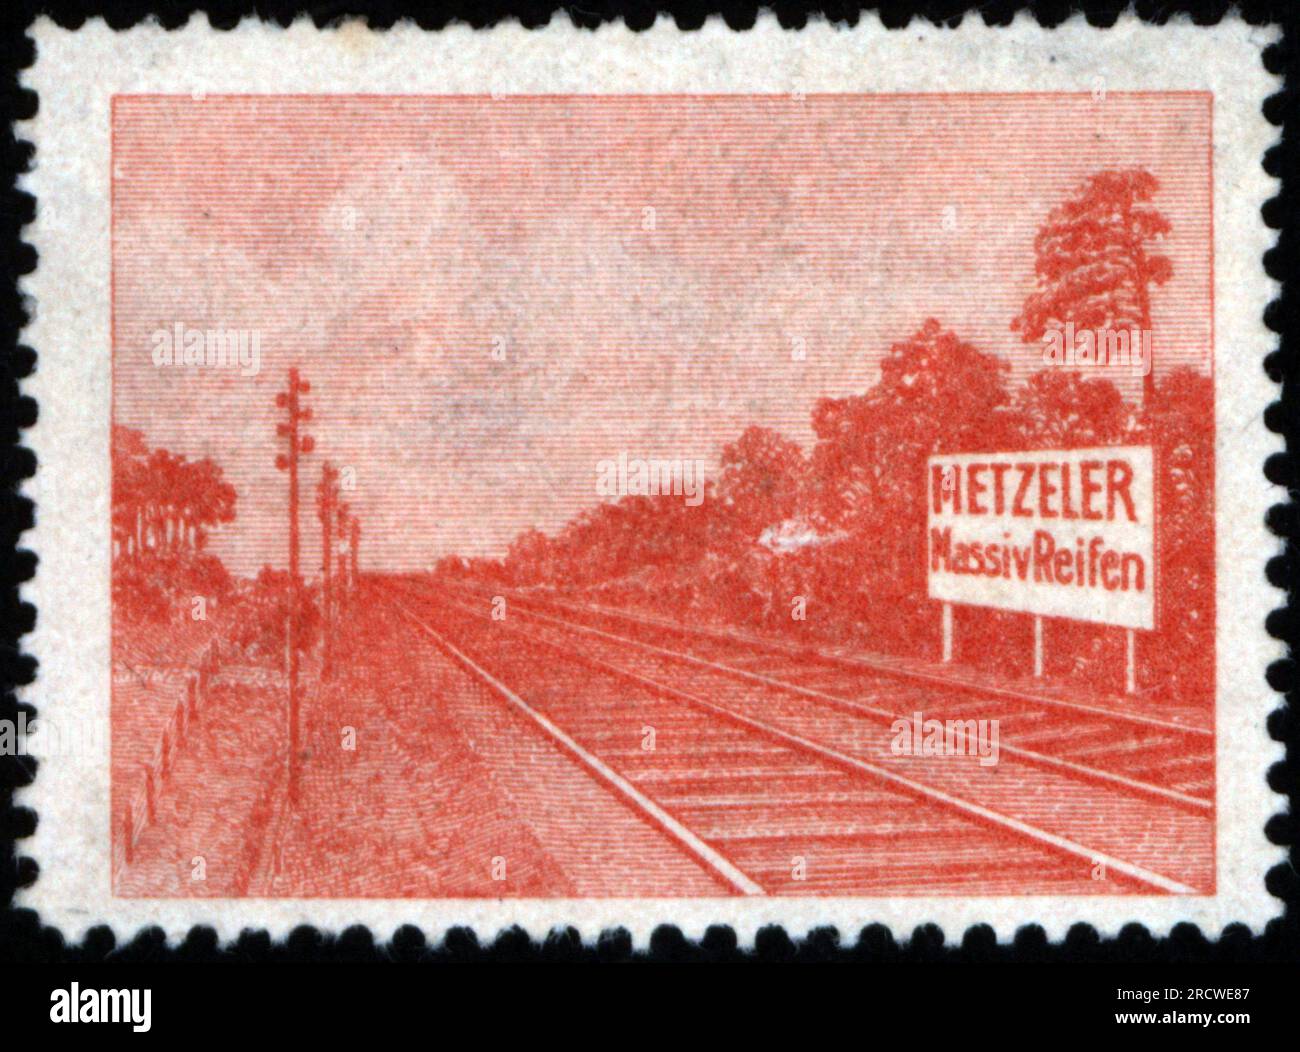 Werbung, Transport/Transport, Metzeler Solid Tyres, Metzeler OHG, München, POSTERSTEMPEL, ADDITIONAL-RIGHTS-CLEARANCE-INFO-NOT-AVAILABLE Stockfoto